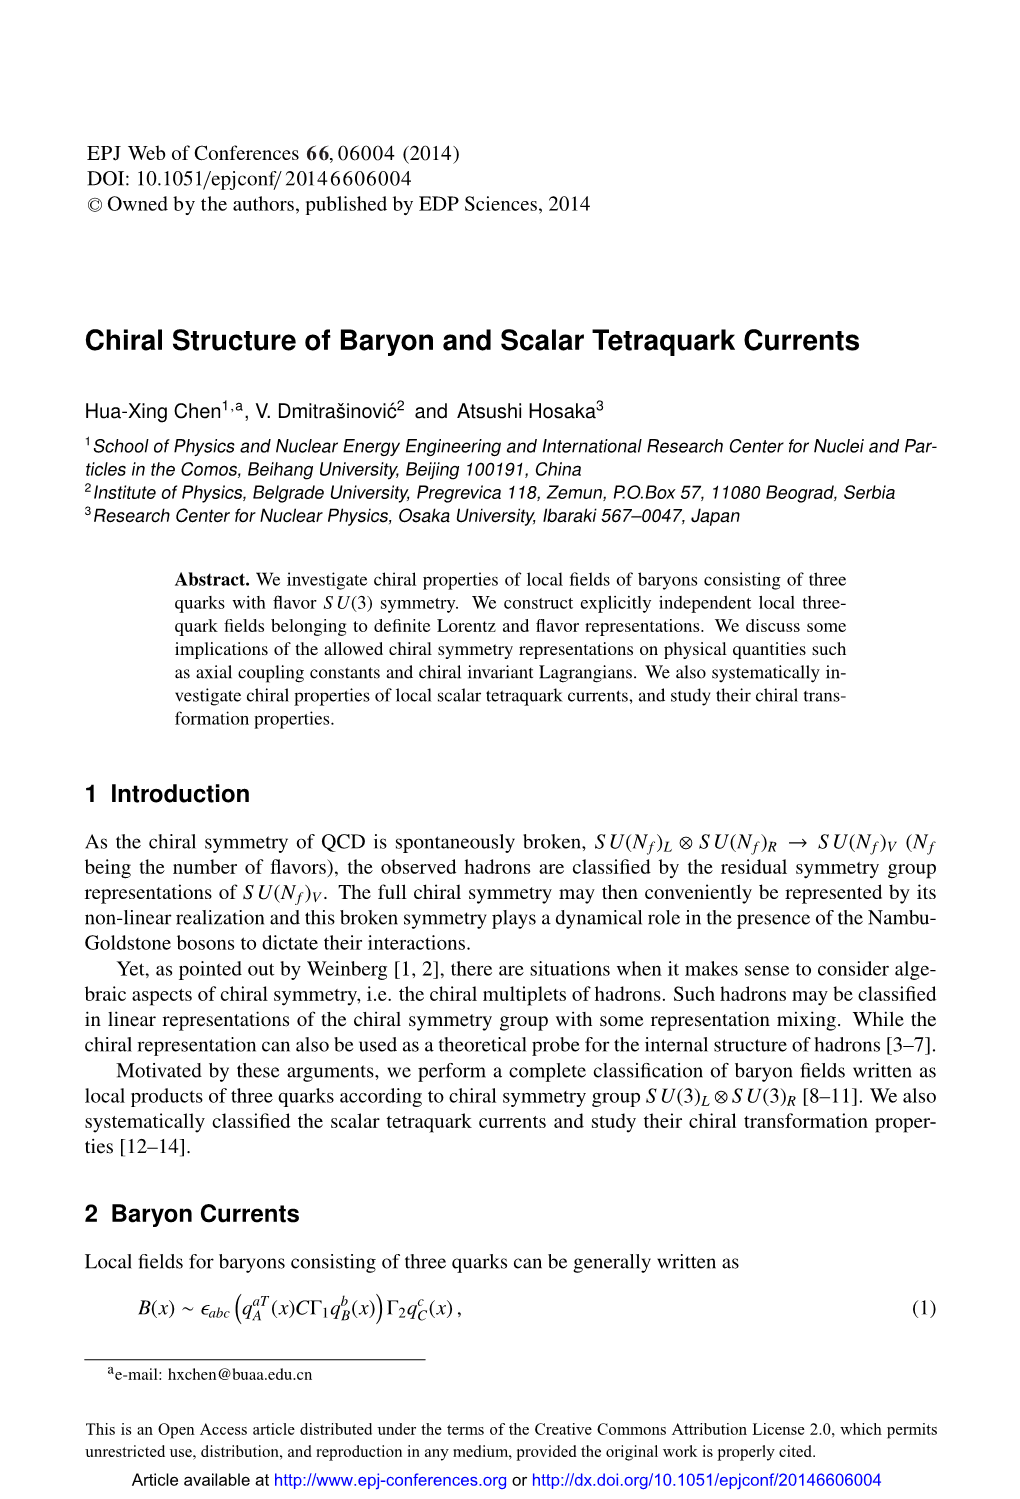 Chiral Structure of Baryon and Scalar Tetraquark Currents